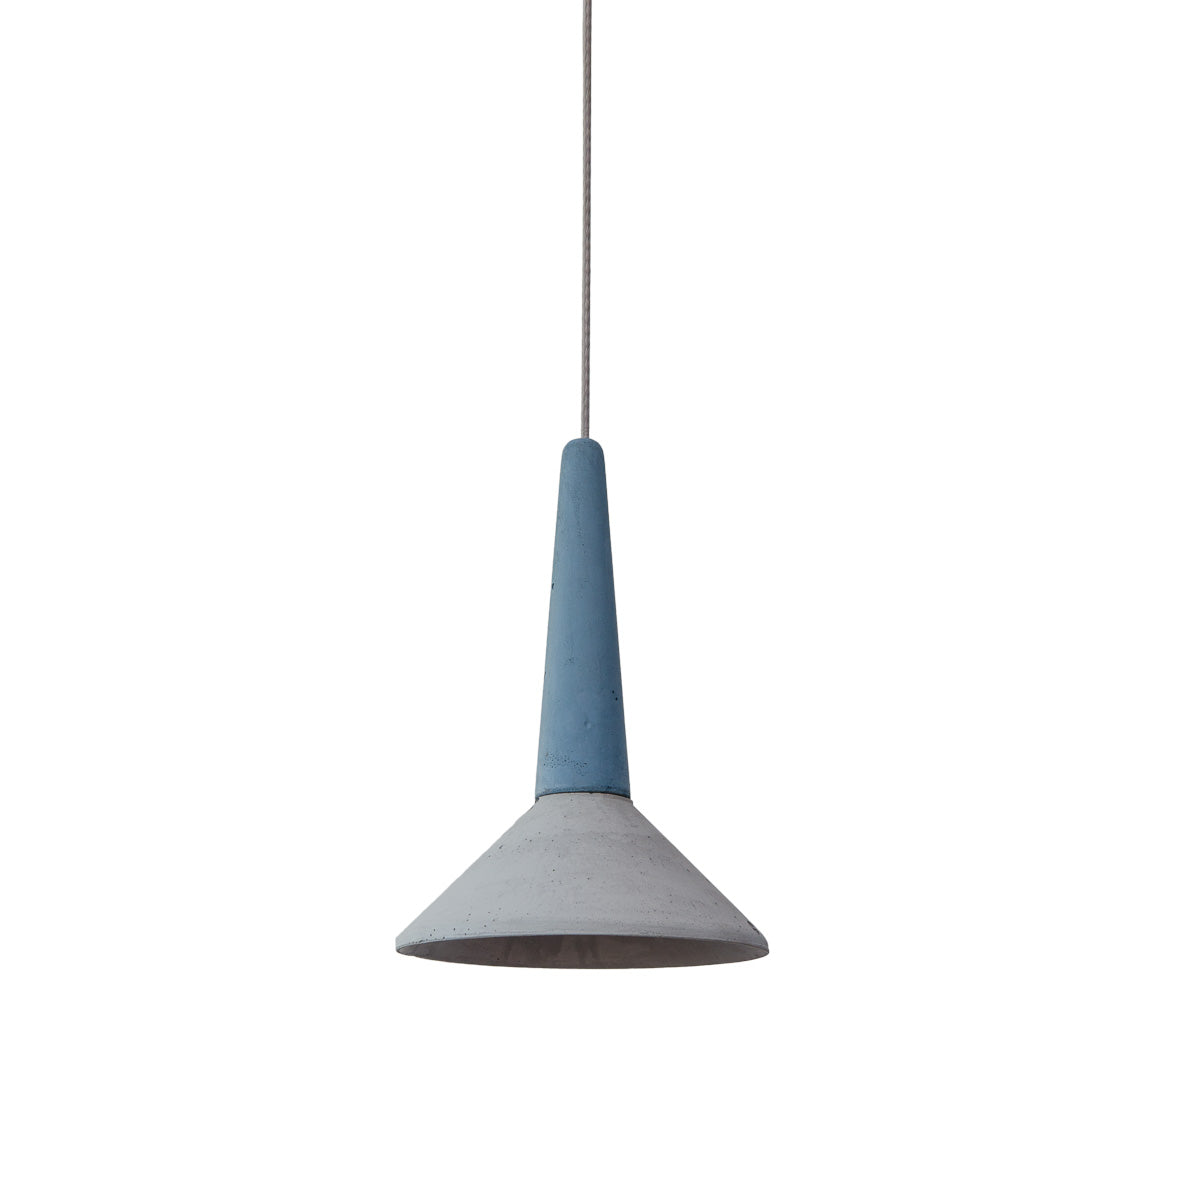 Loftlight Medano pendant lamp in grey and blue hand cast in concrete from Warehouse Home 